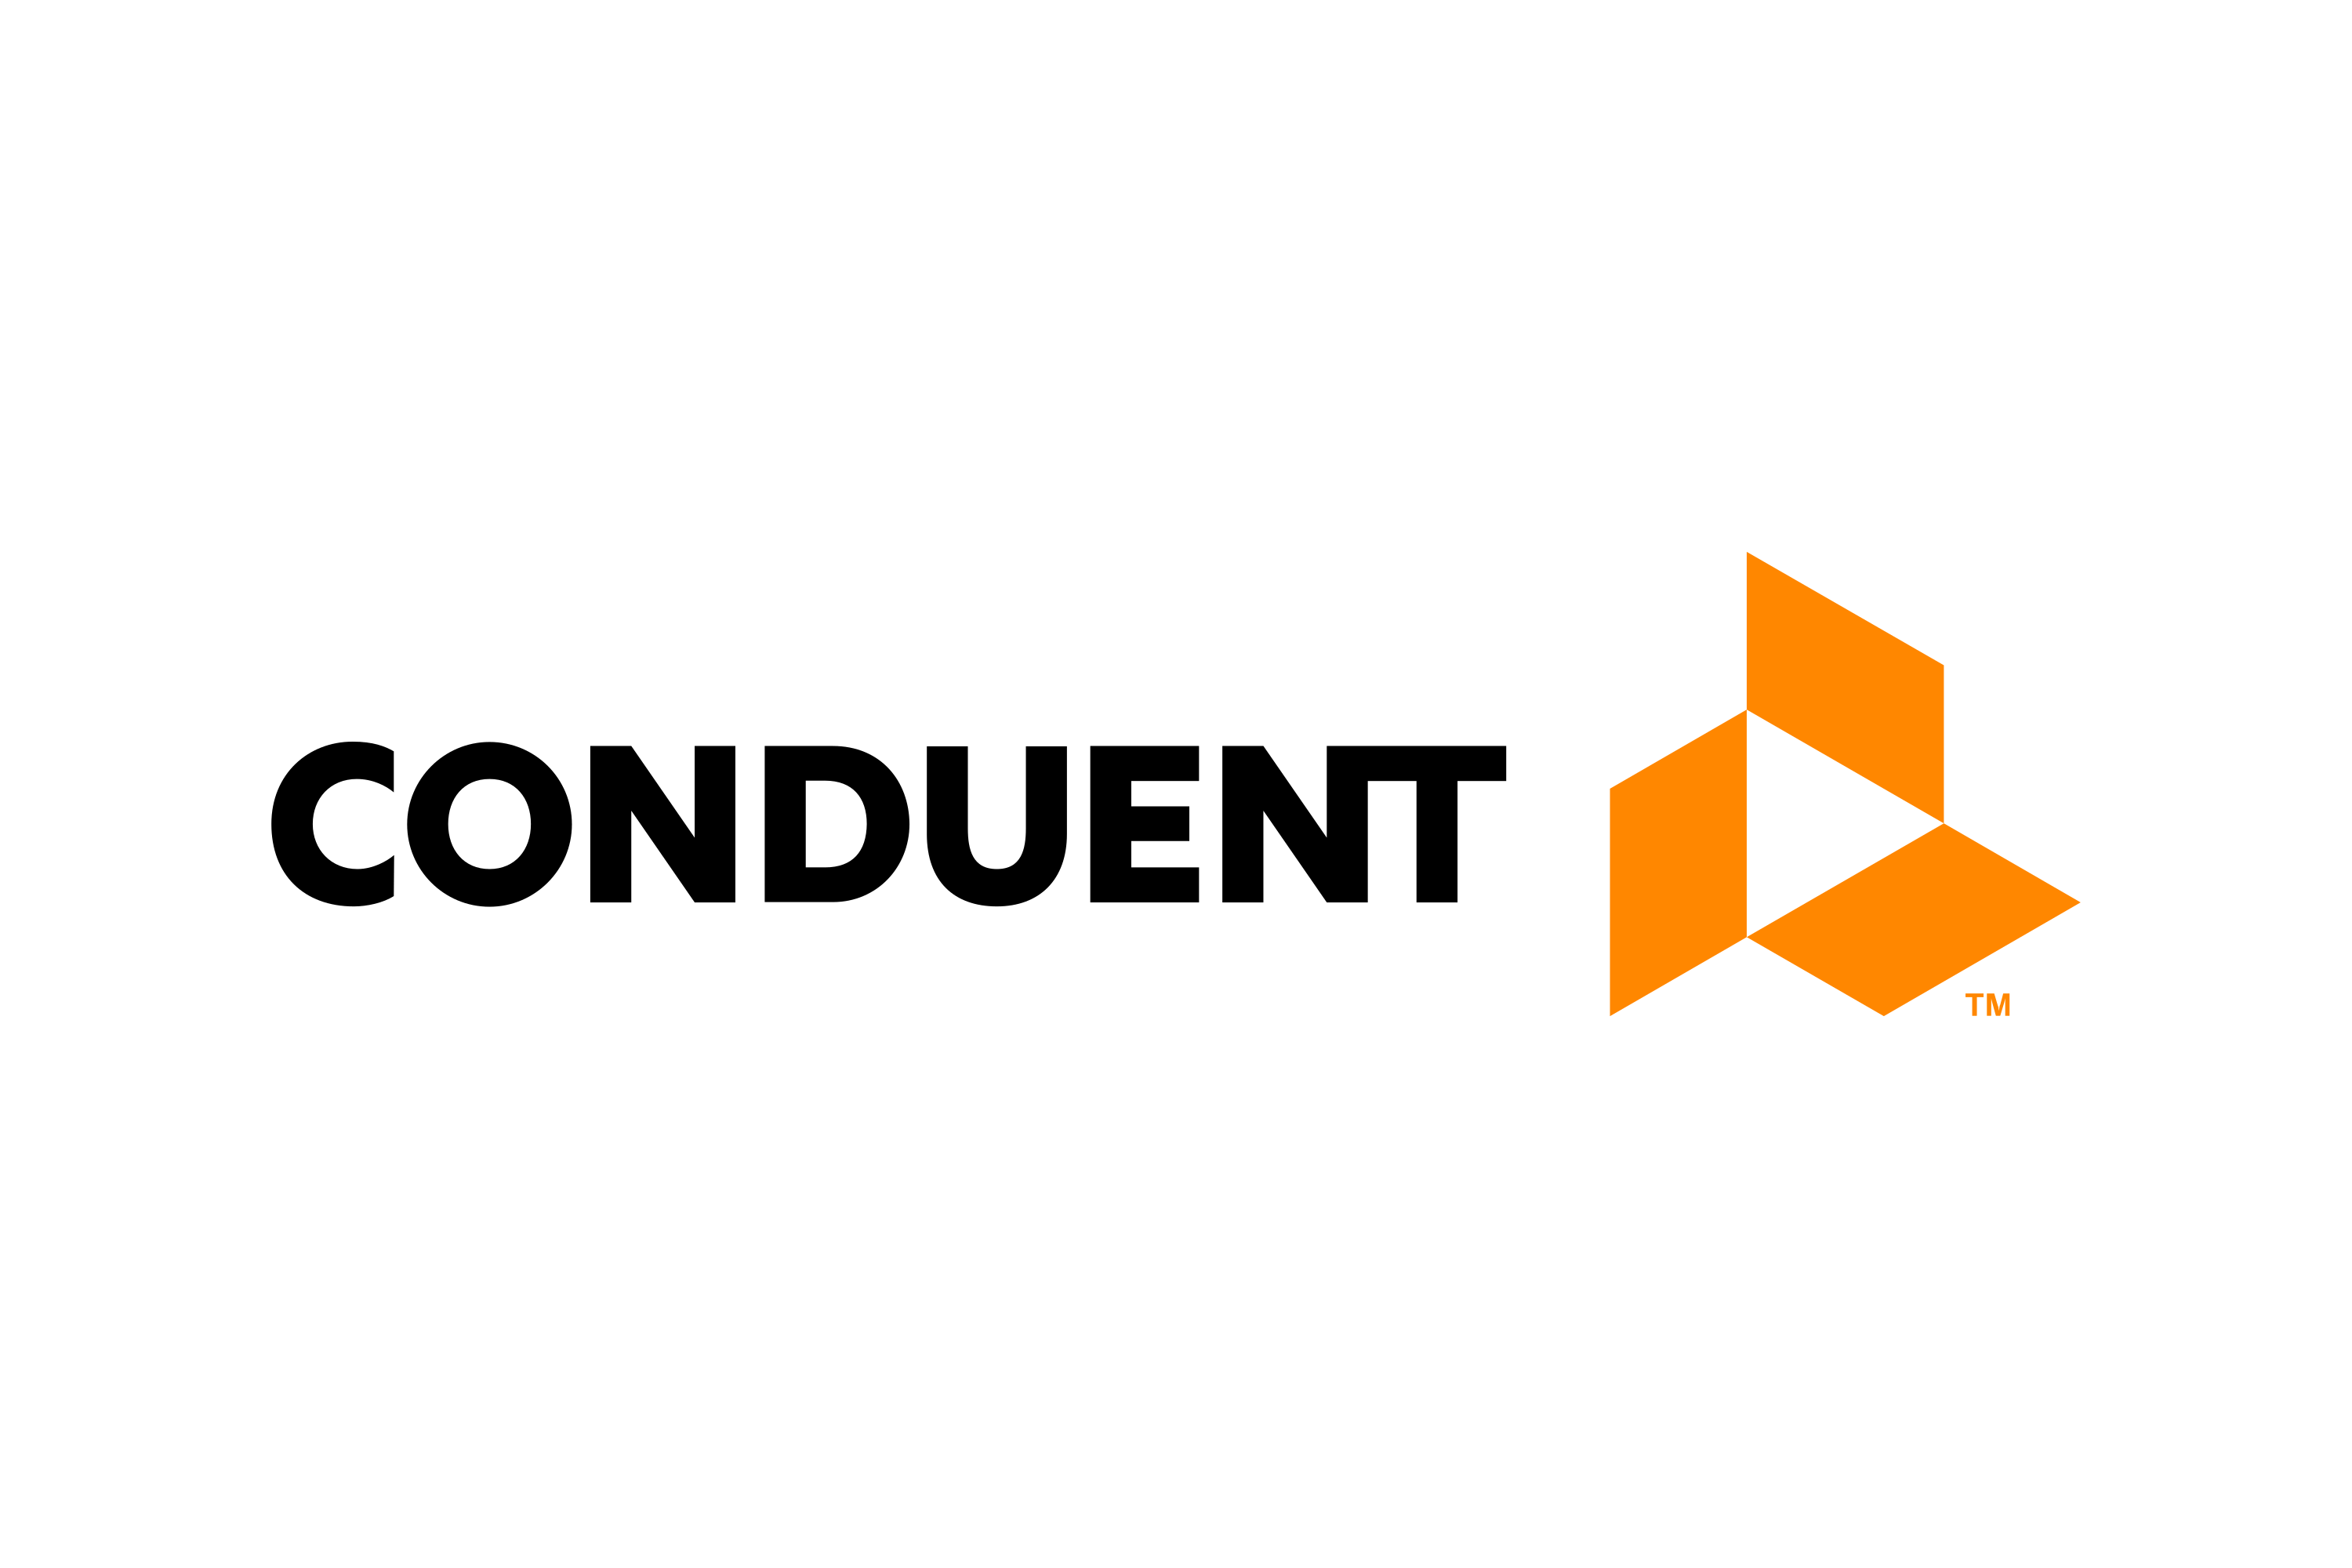 Download Conduent Logo in SVG Vector or PNG File Format - Logo.wine